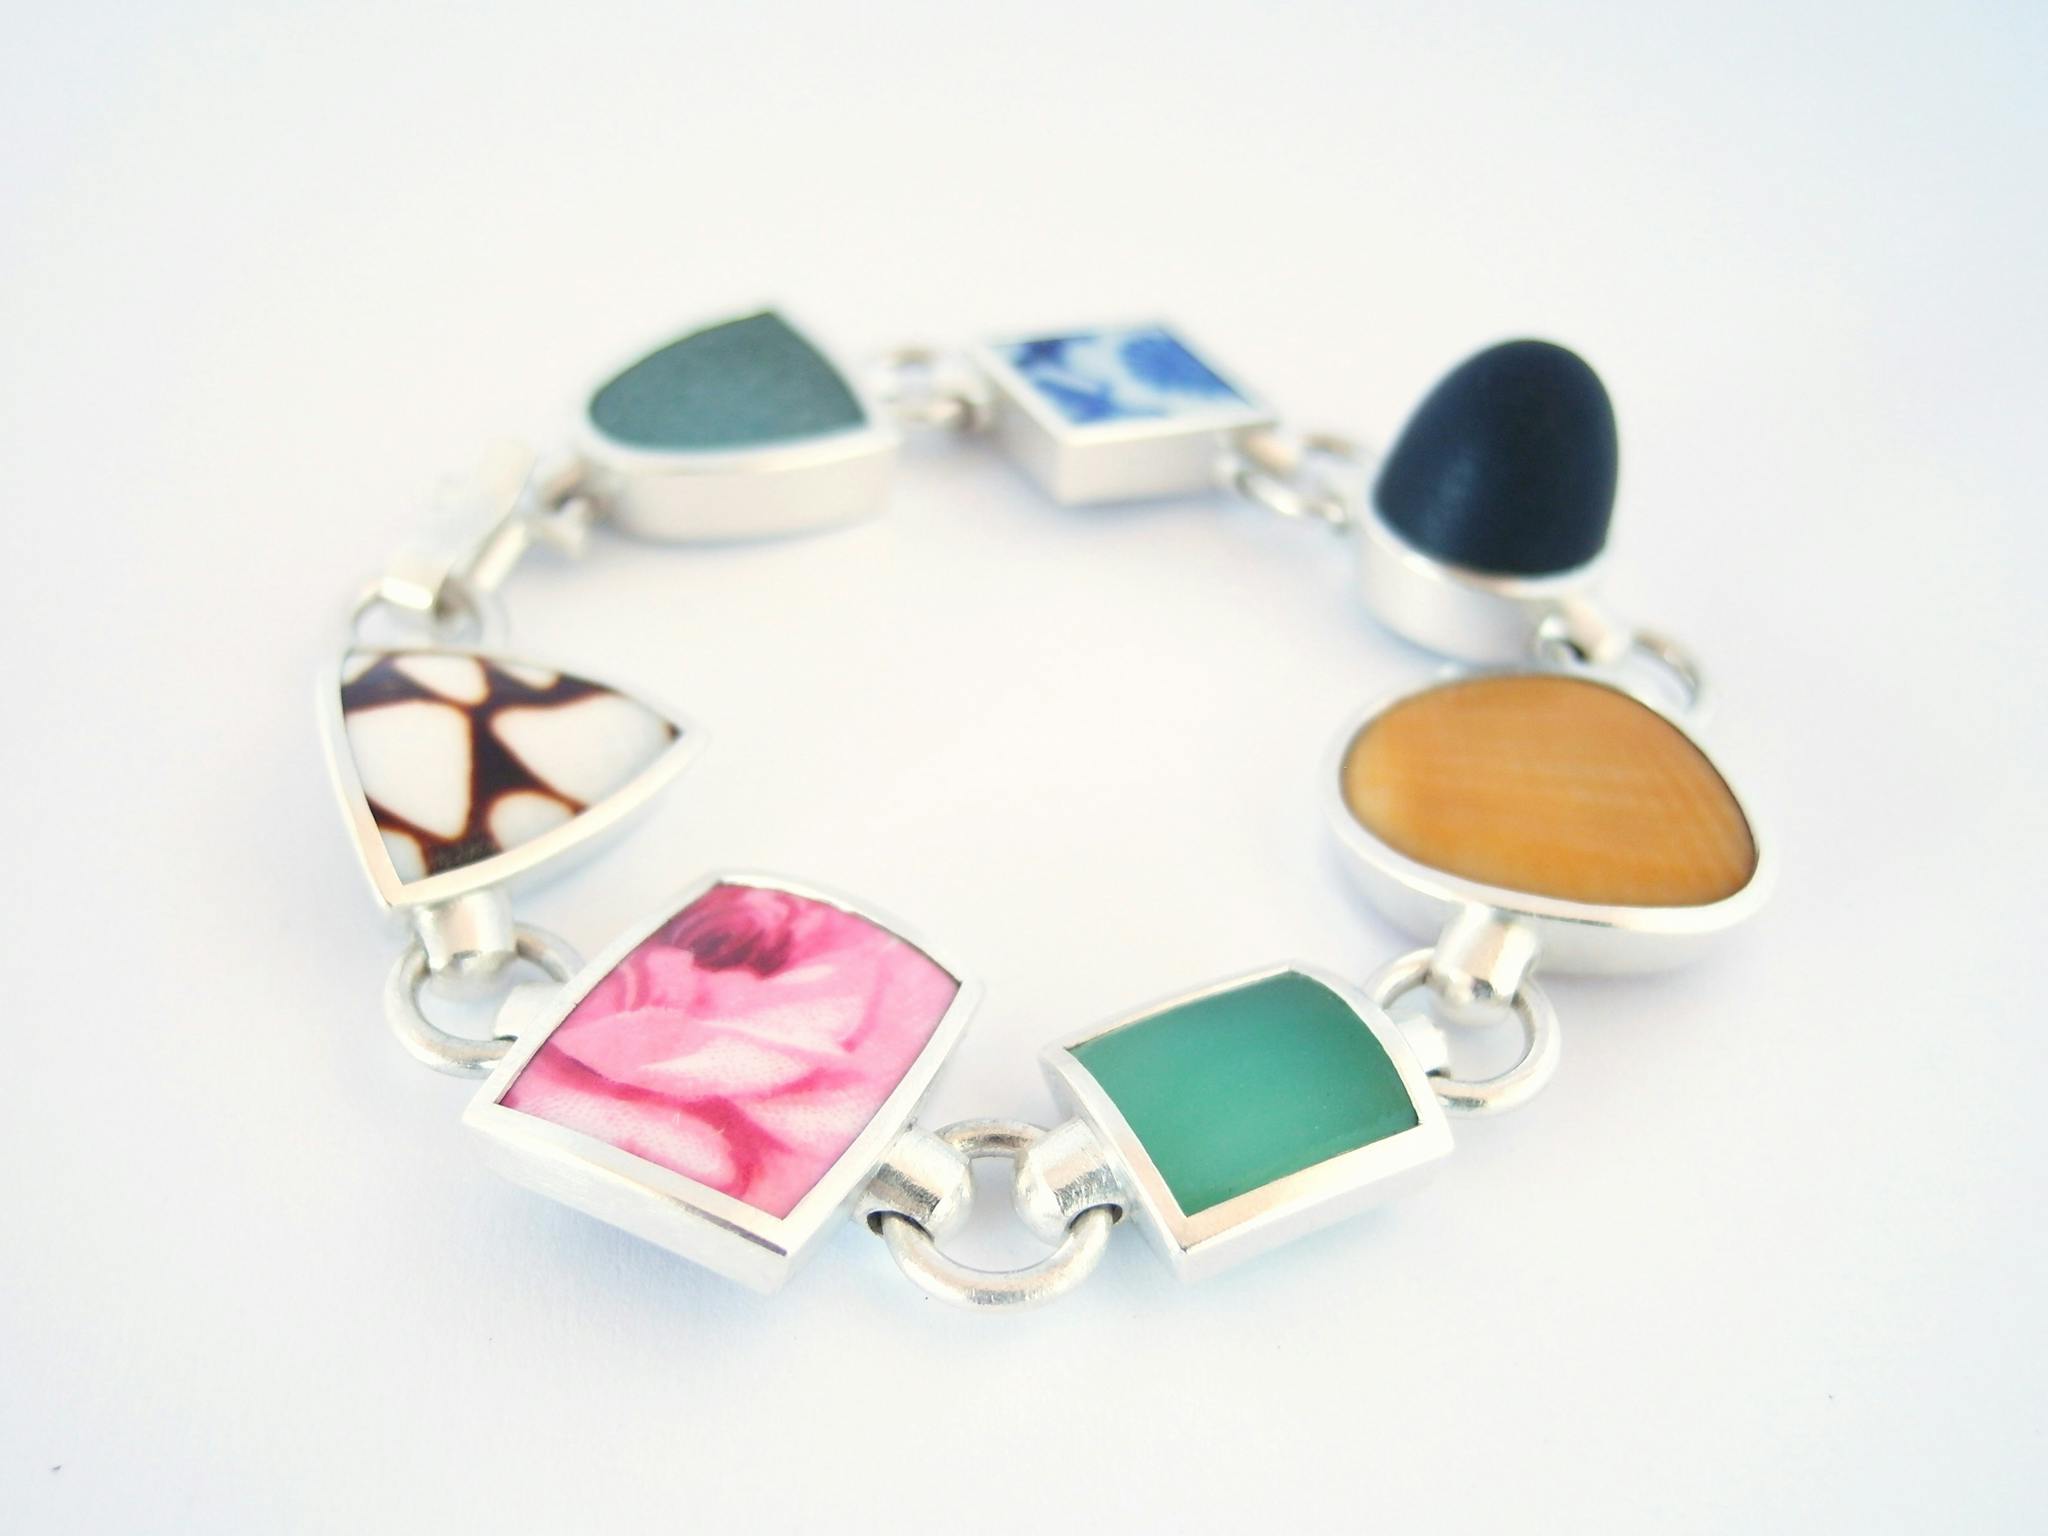 Hand-made silver bangle by Marcus Foley set with glass, pebble, porcelain and shell.